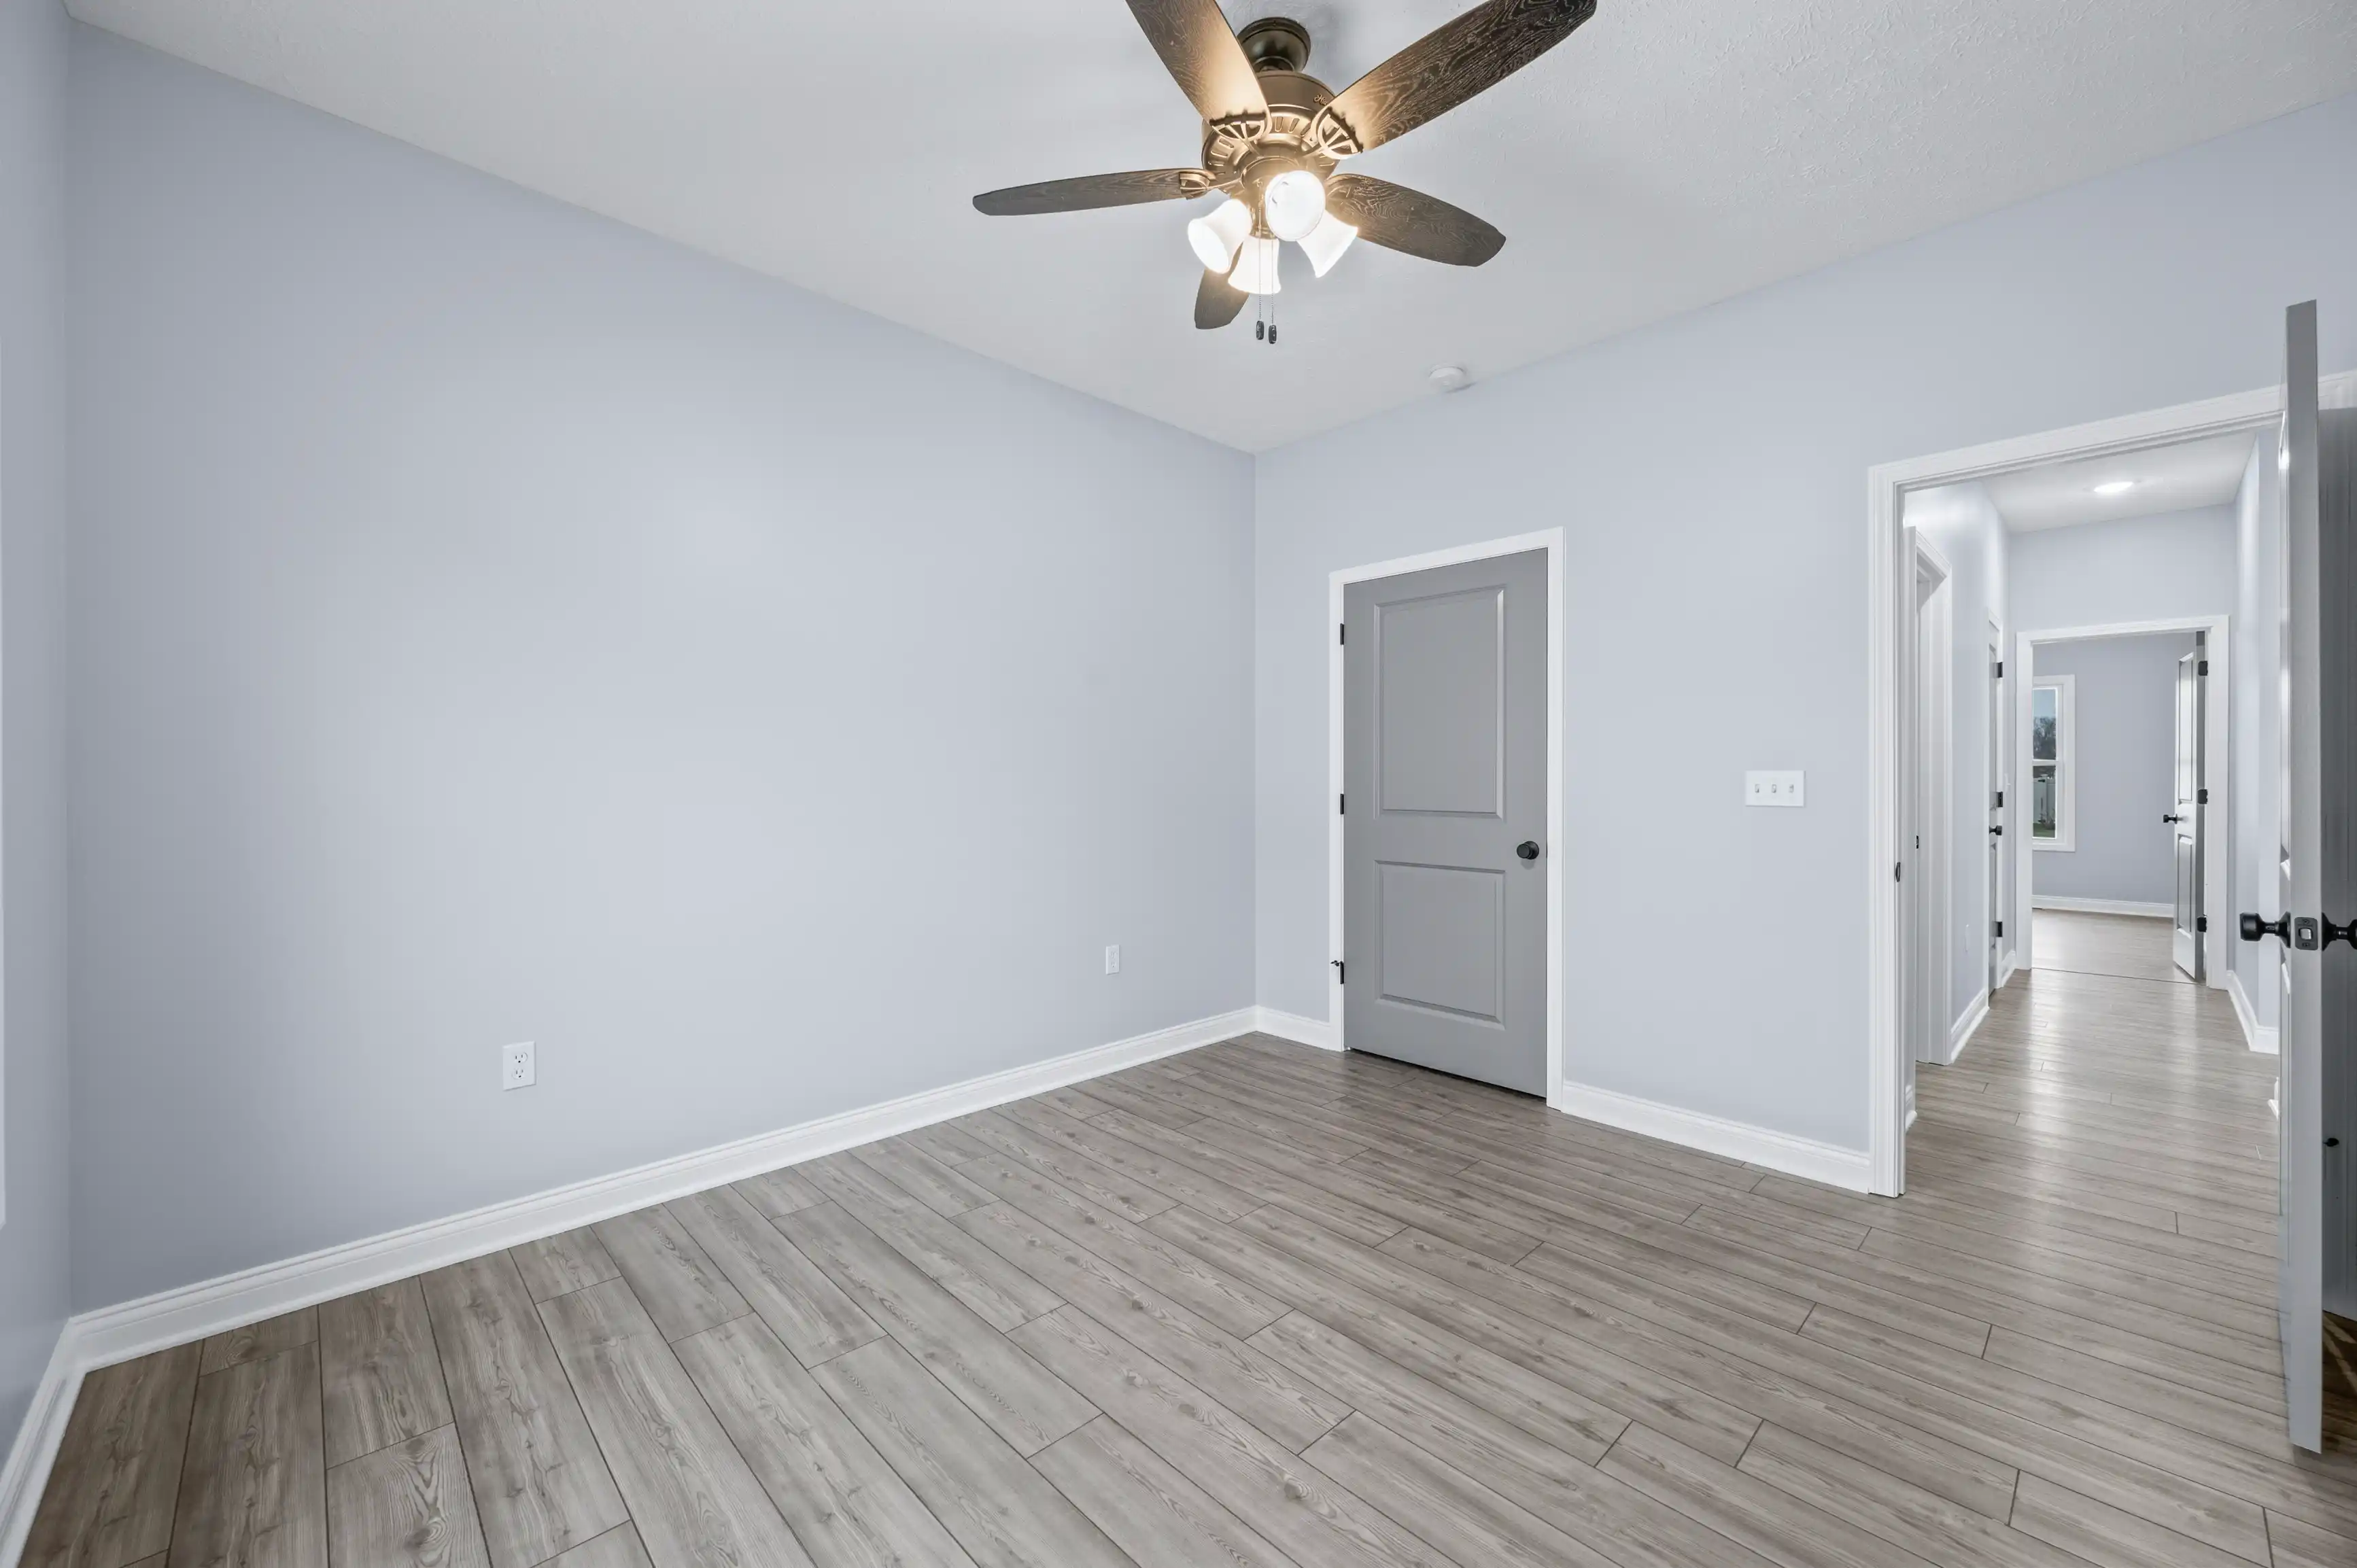 Spacious empty room with pale blue walls, wooden laminate flooring, a ceiling fan with lights, and multiple open doors leading to other parts of the house.